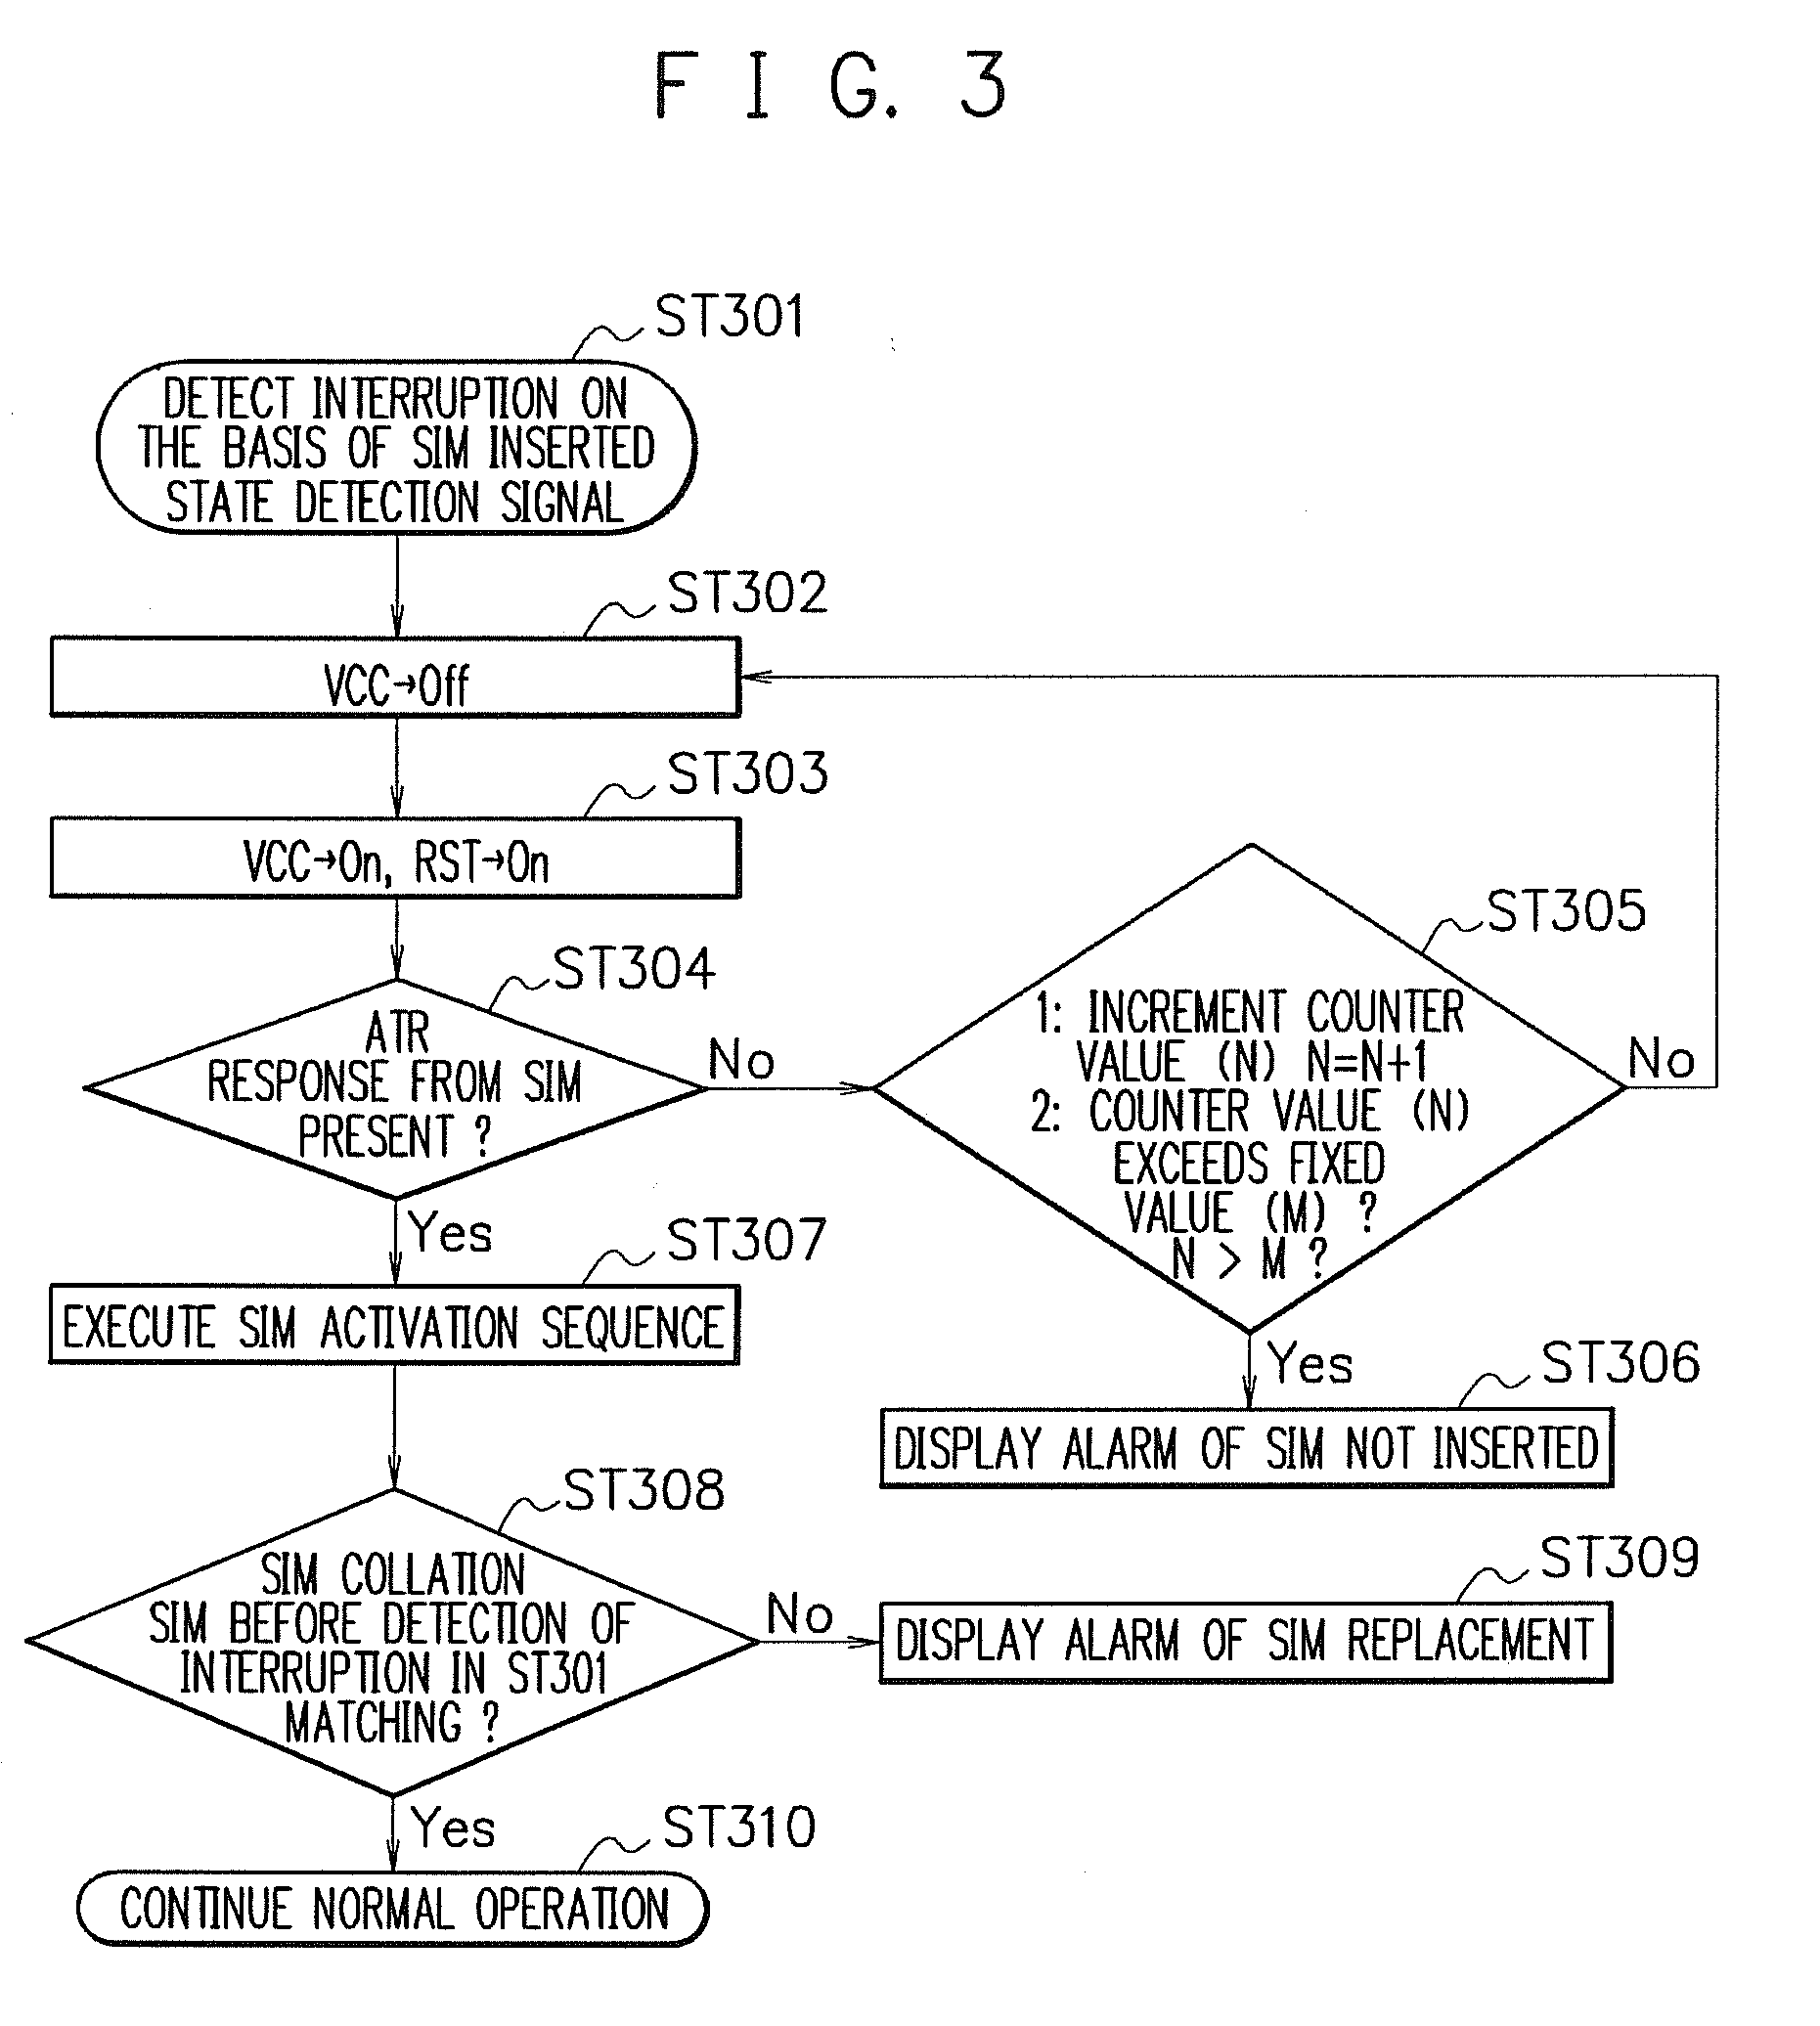 Mobile communication terminal and mobile communication method